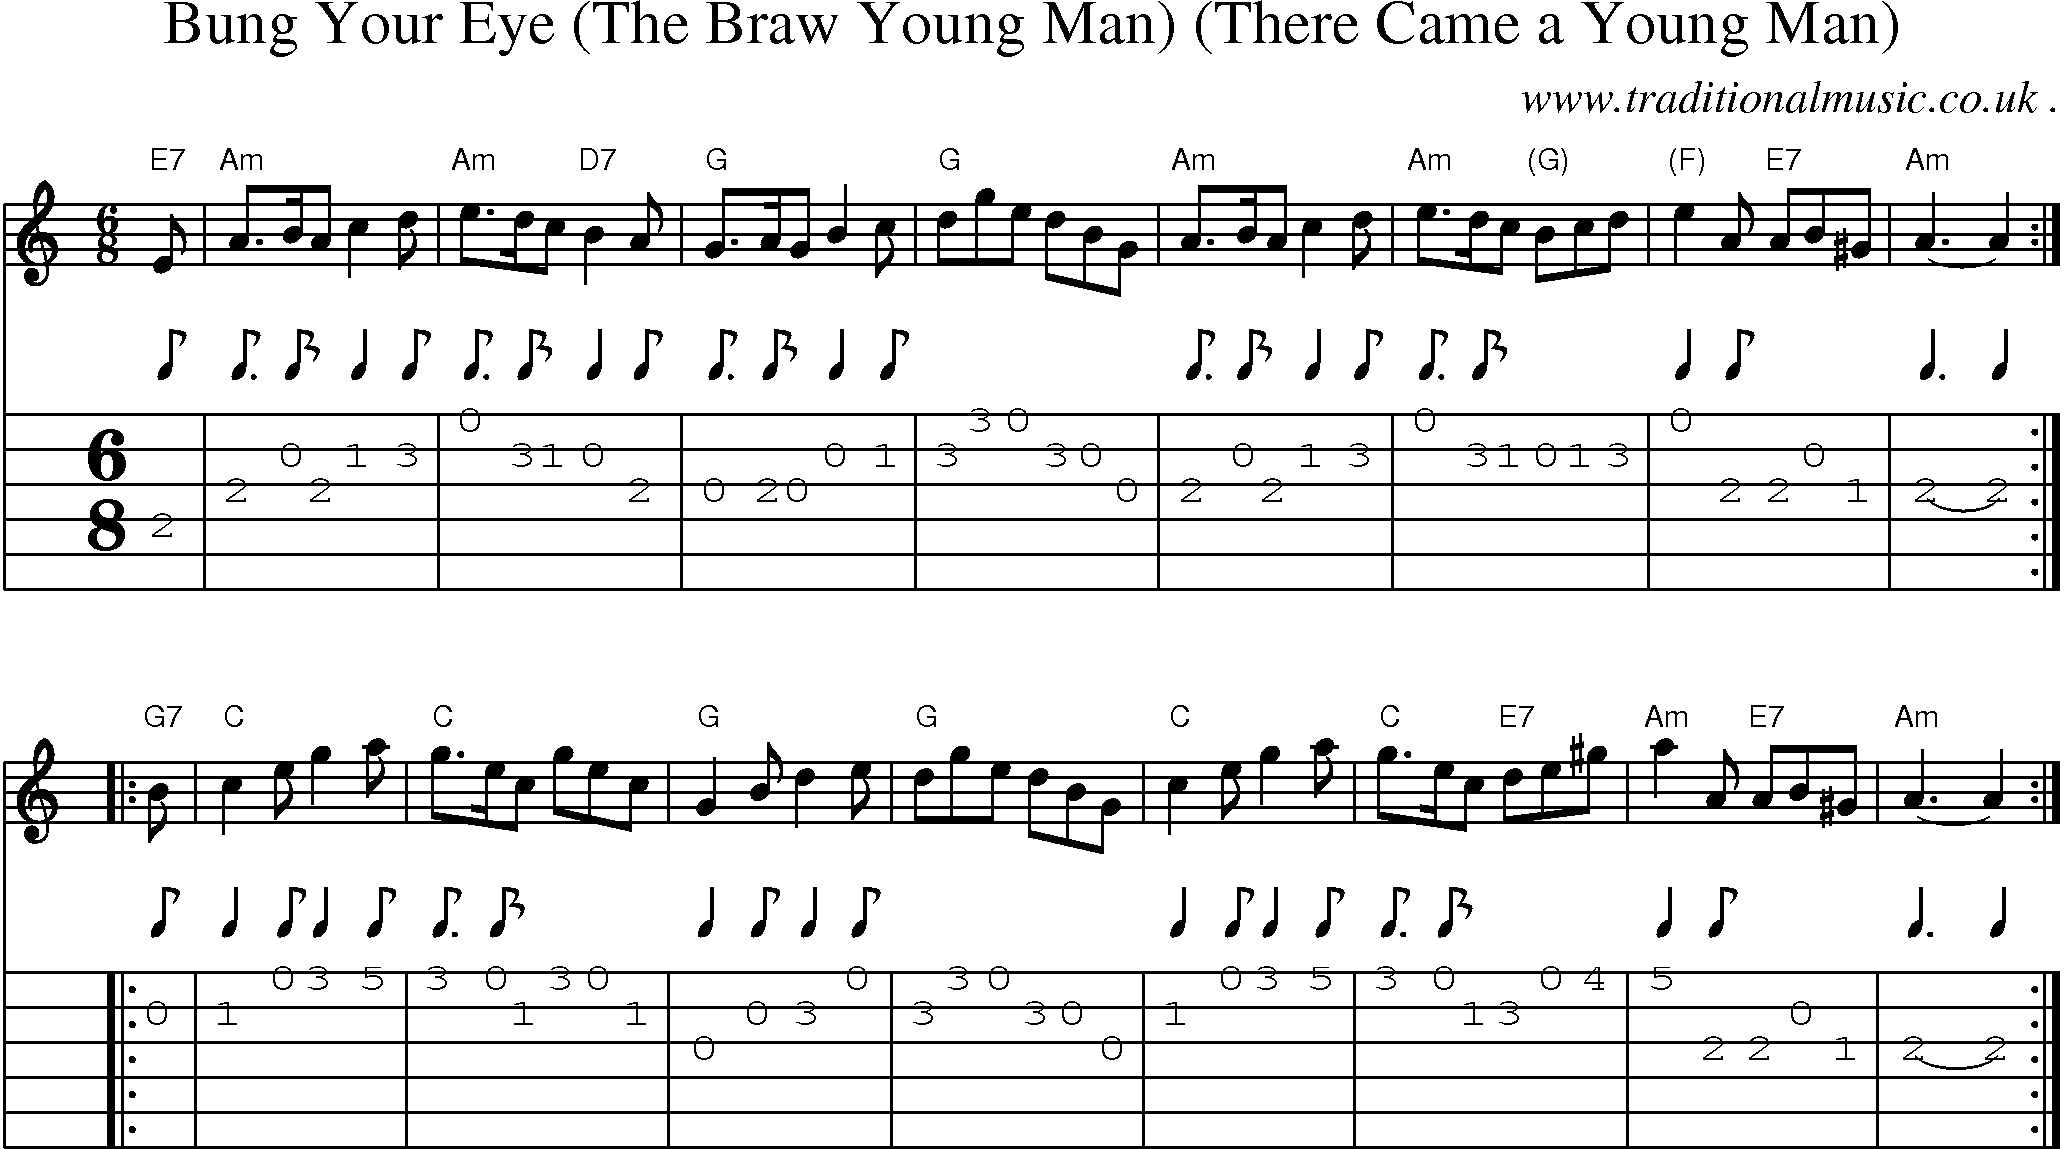 Sheet-music  score, Chords and Guitar Tabs for Bung Your Eye The Braw Young Man There Came A Young Man